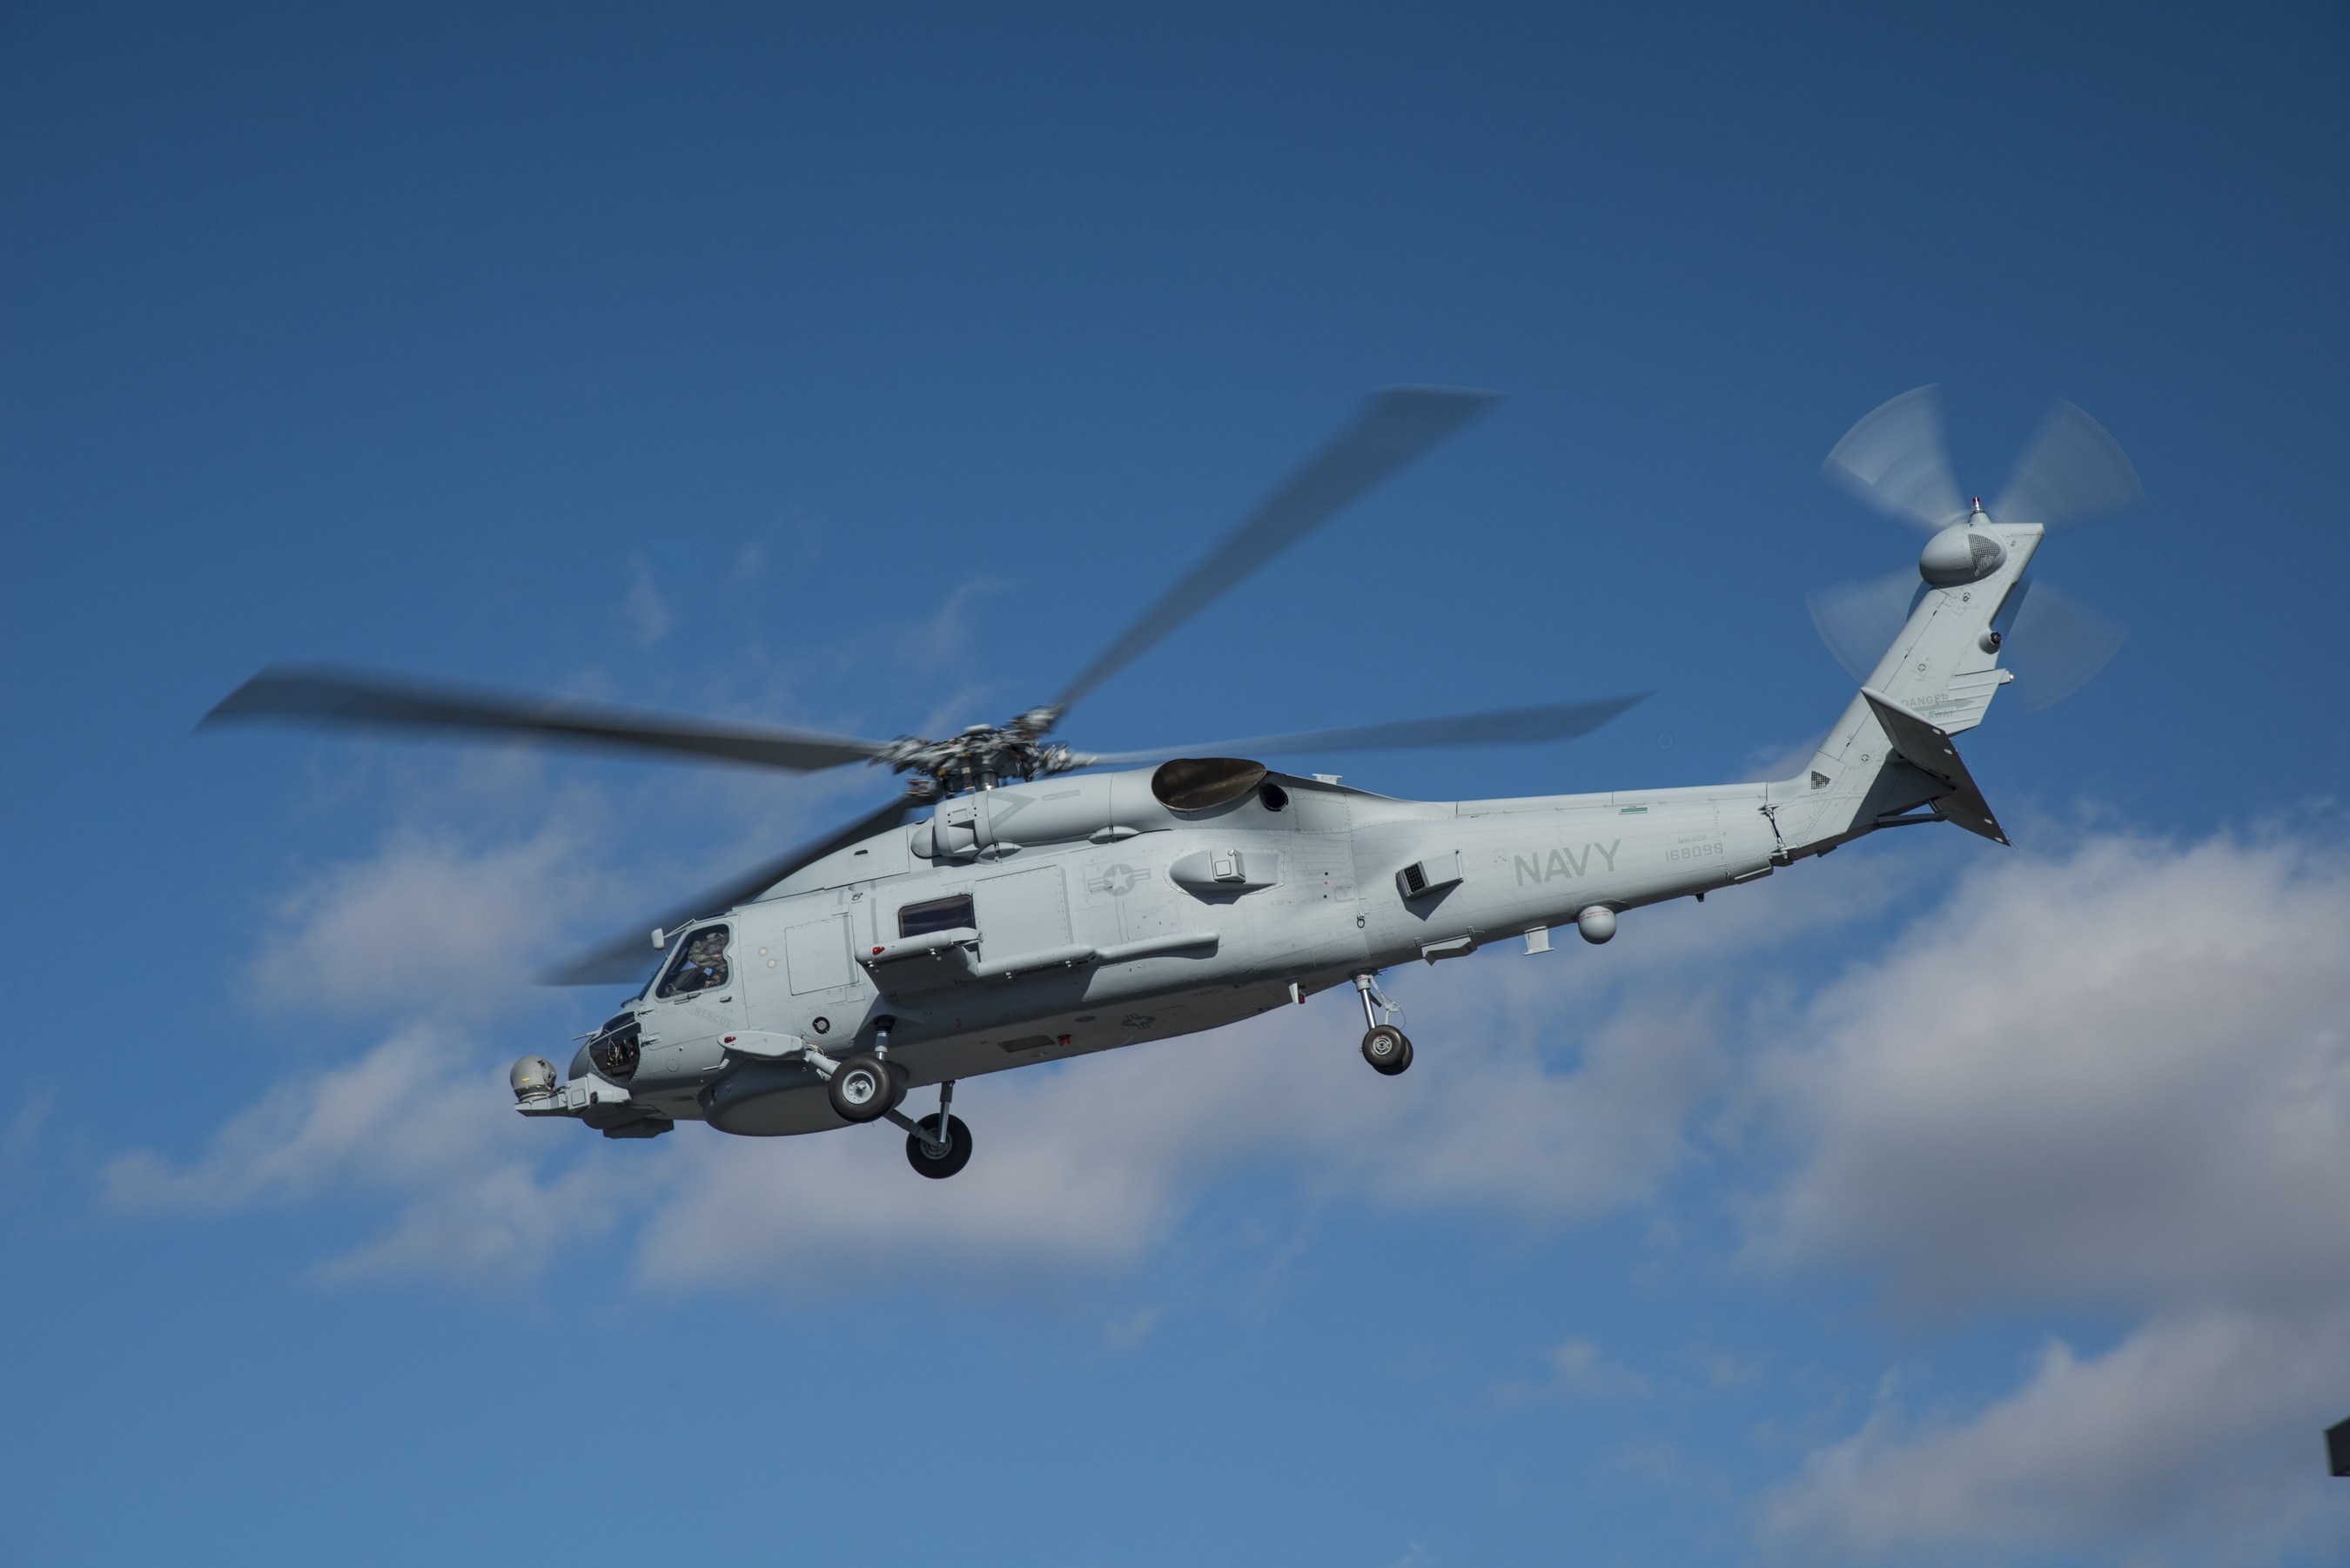 The U.S. Navy's 200th MH-60R "Romeo" helicopter takes flight on Nov. 12, 2014, from the Lockheed Martin facility in Owego, New York.